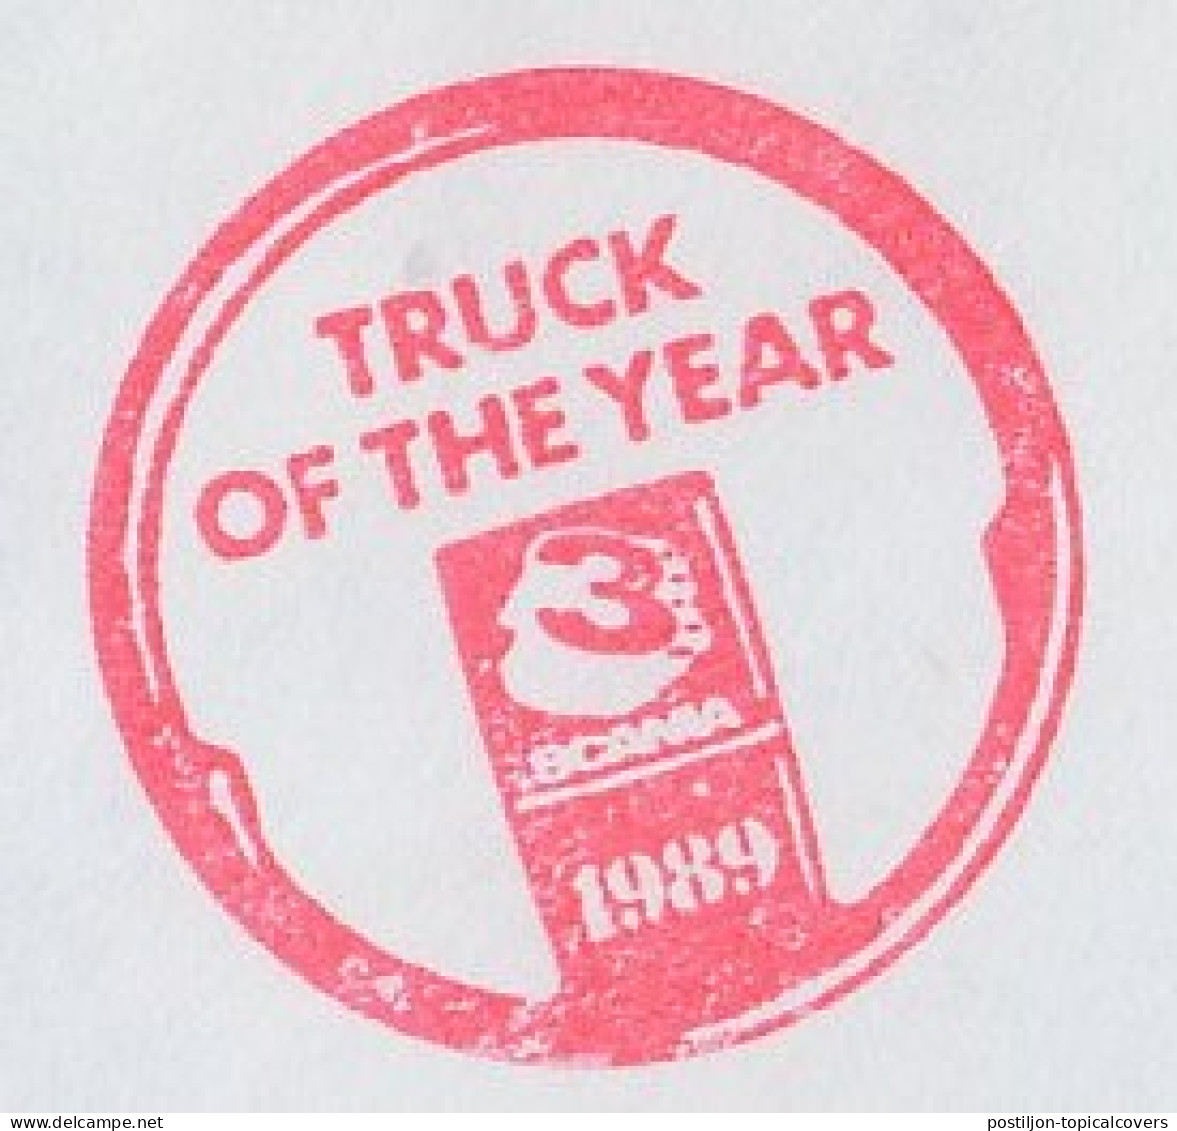 Meter Cover Netherlands 1990 Scania - Truck Of The Year 1989 - Trucks